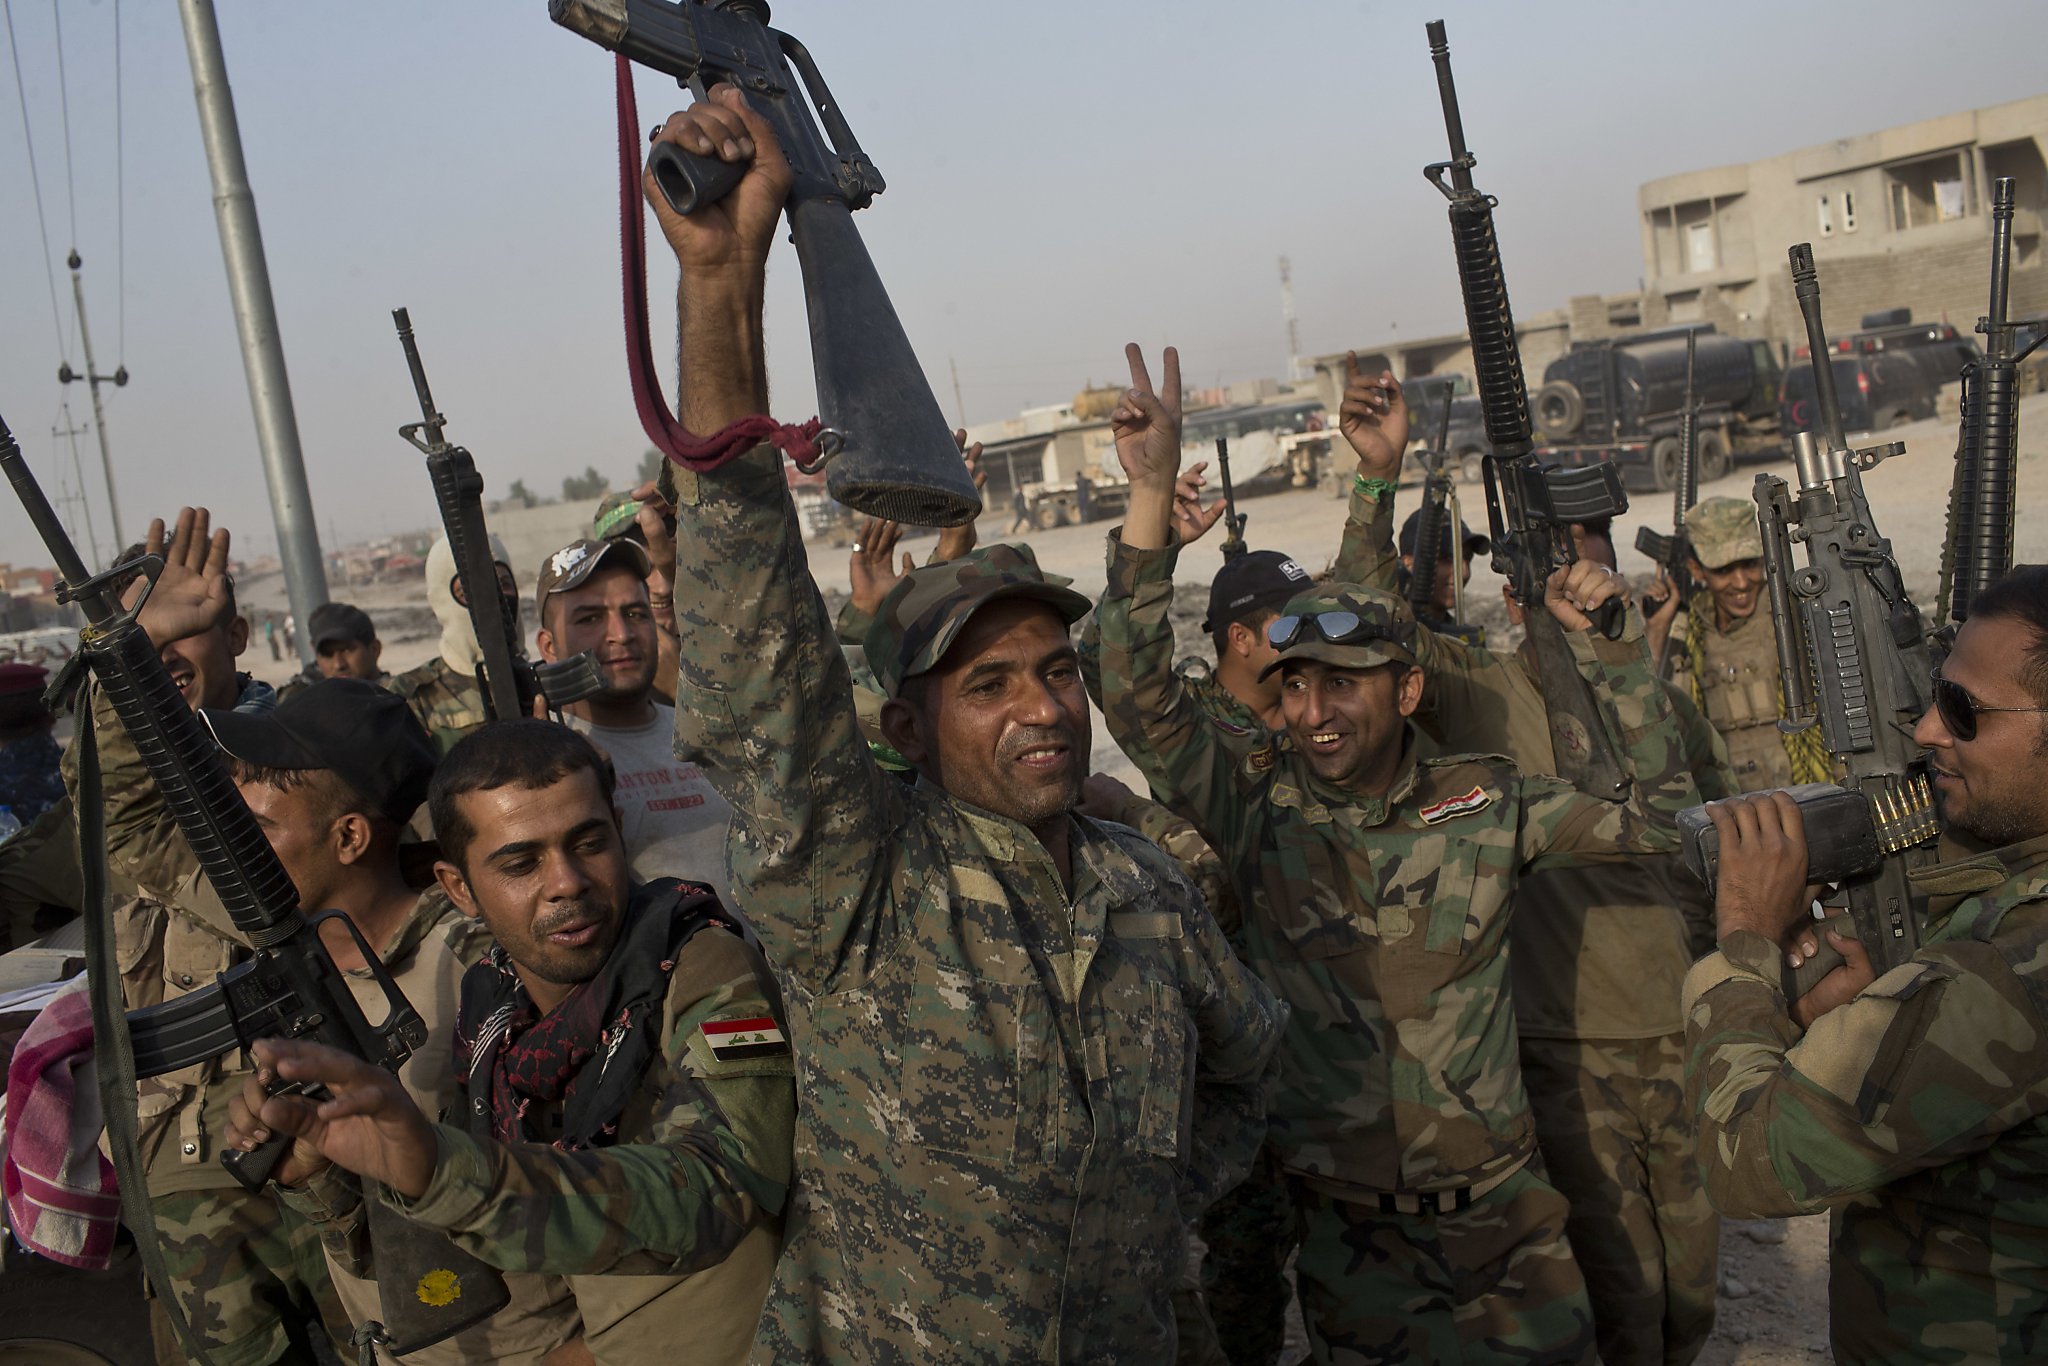 Iraqi general calls on Islamic militants in Mosul to surrender